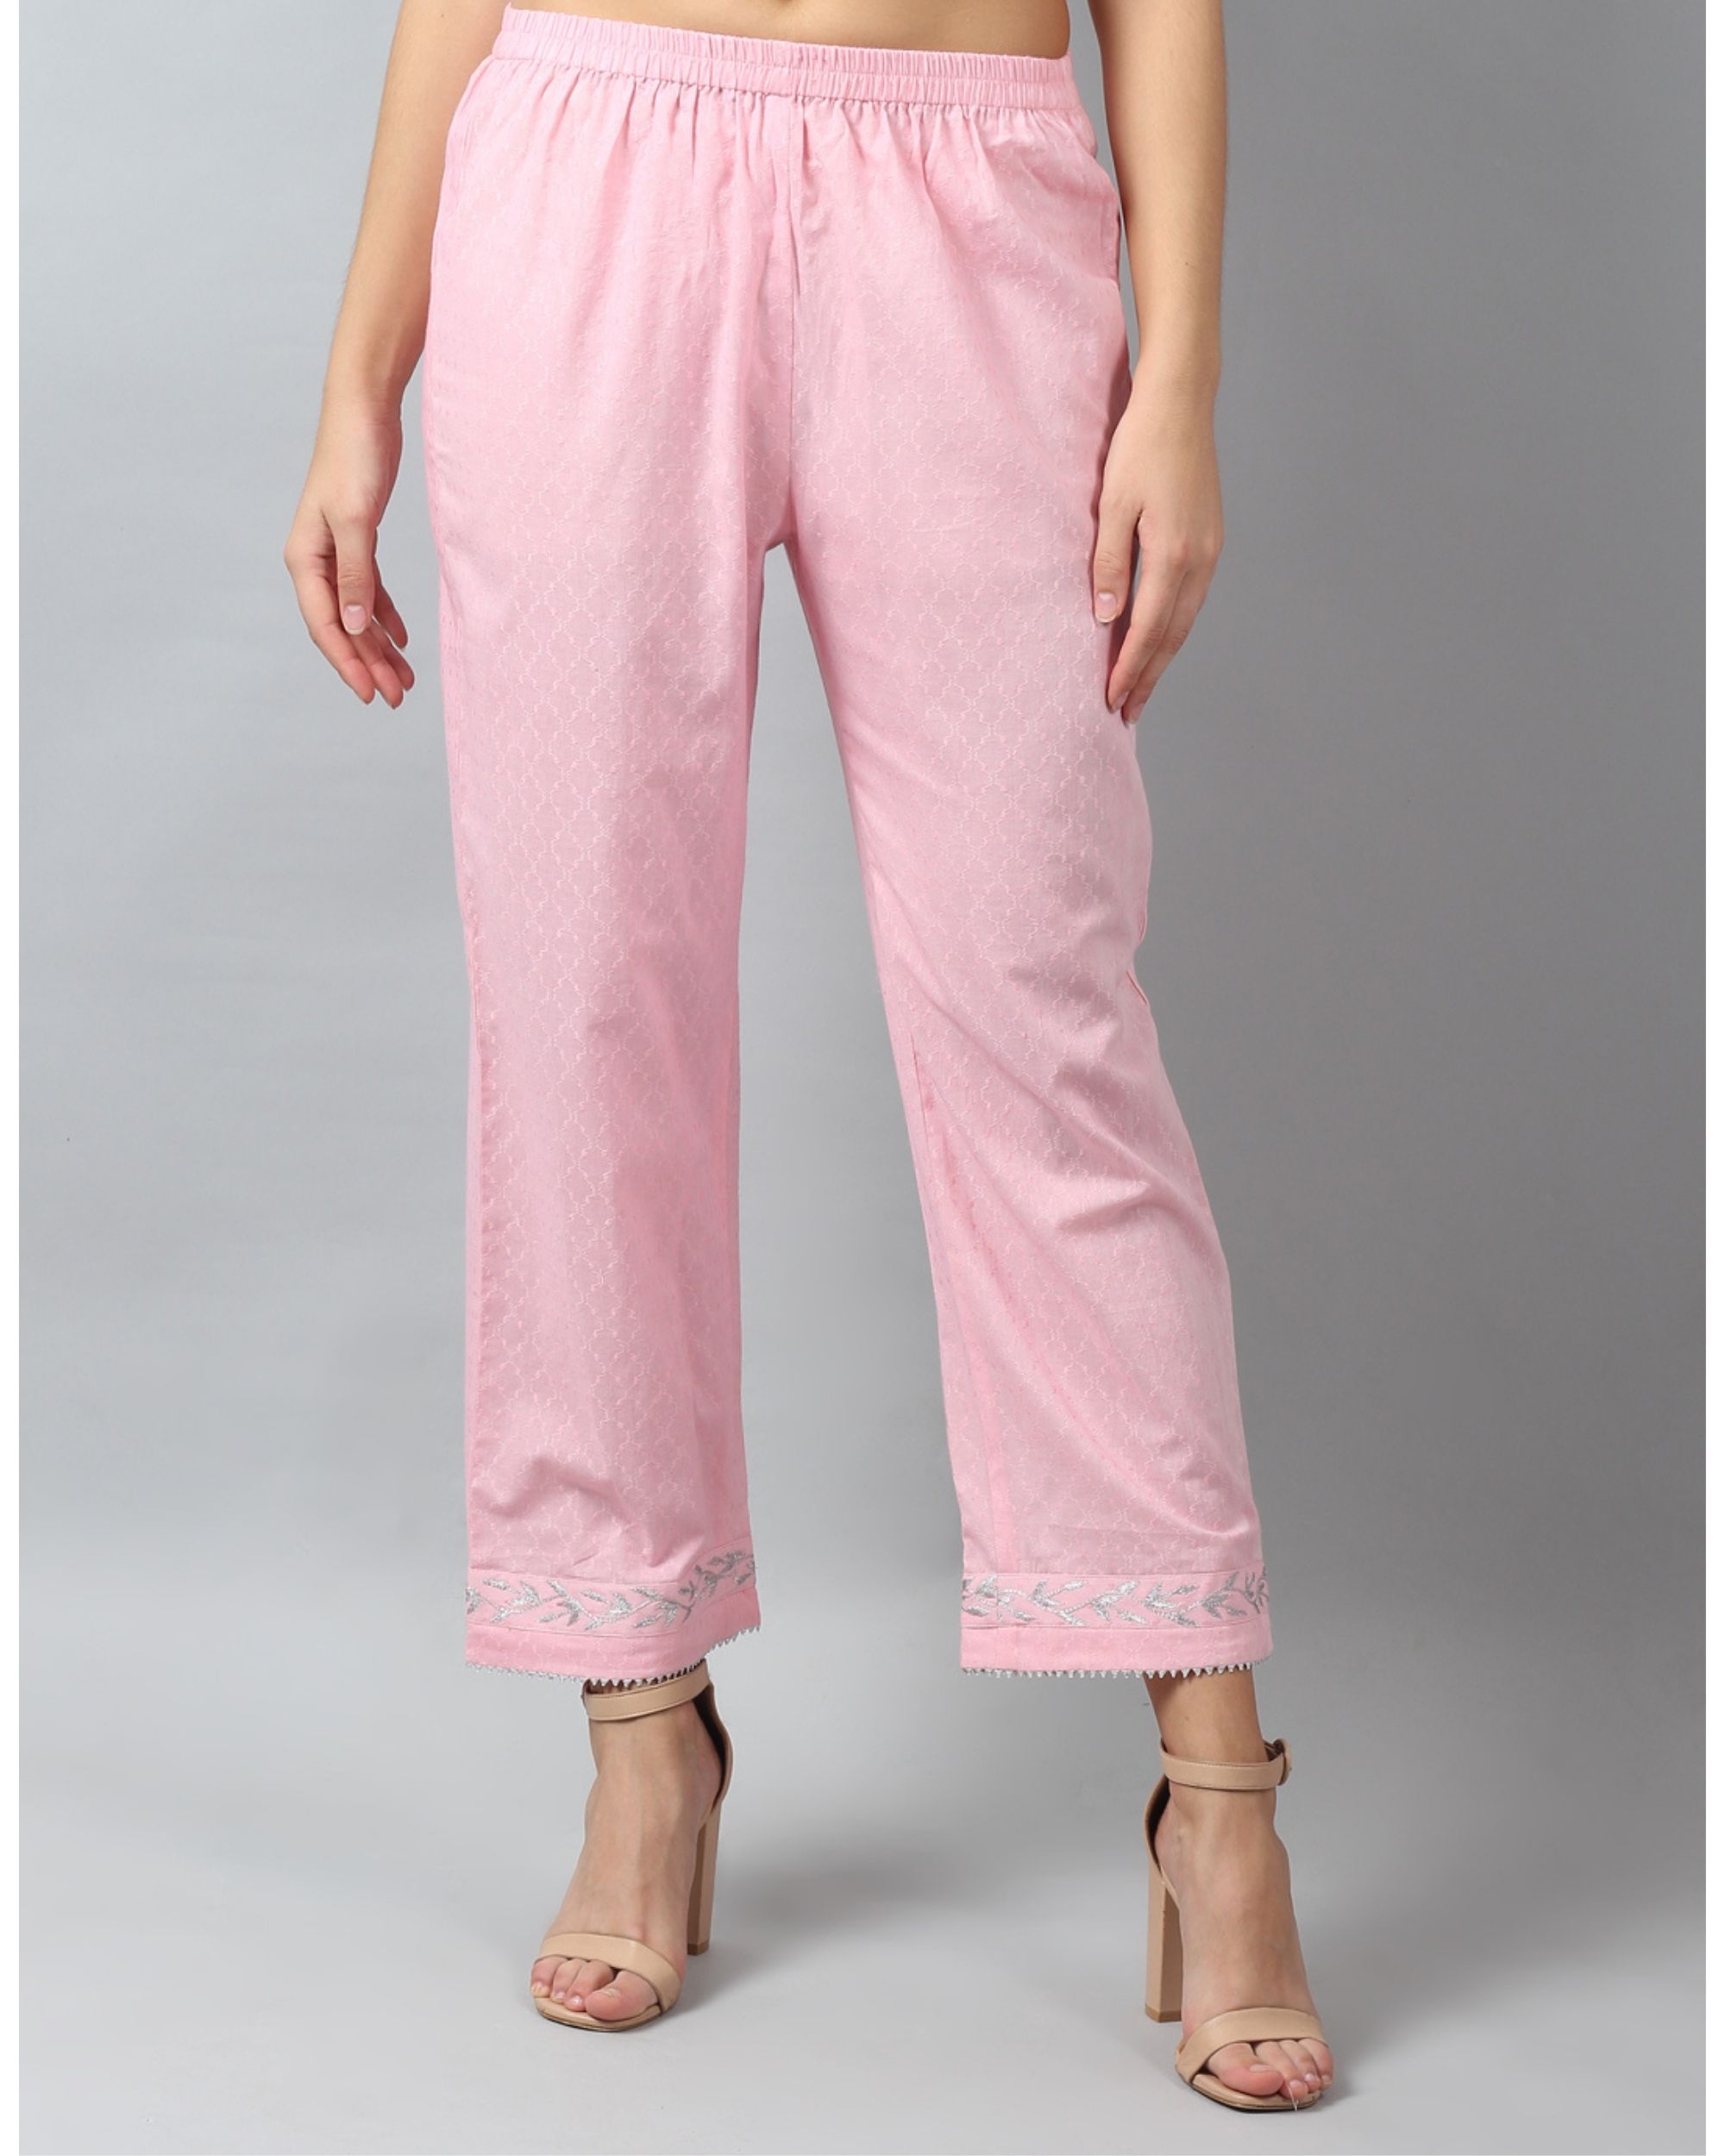 Baby pink embroidered pants by D'ART STUDIO